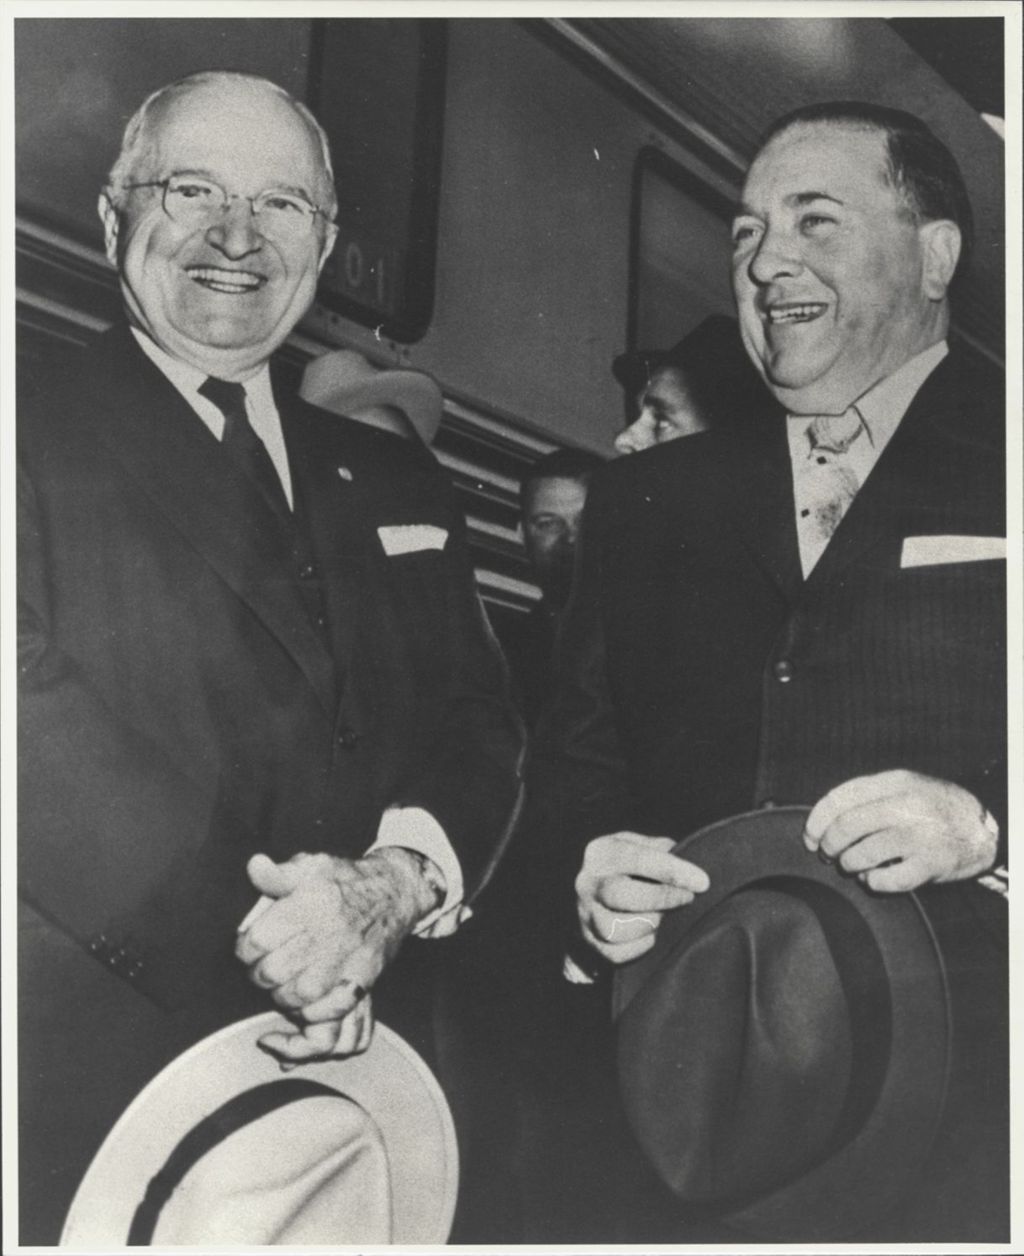 Miniature of Harry S. Truman and Richard J. Daley sharing a laugh